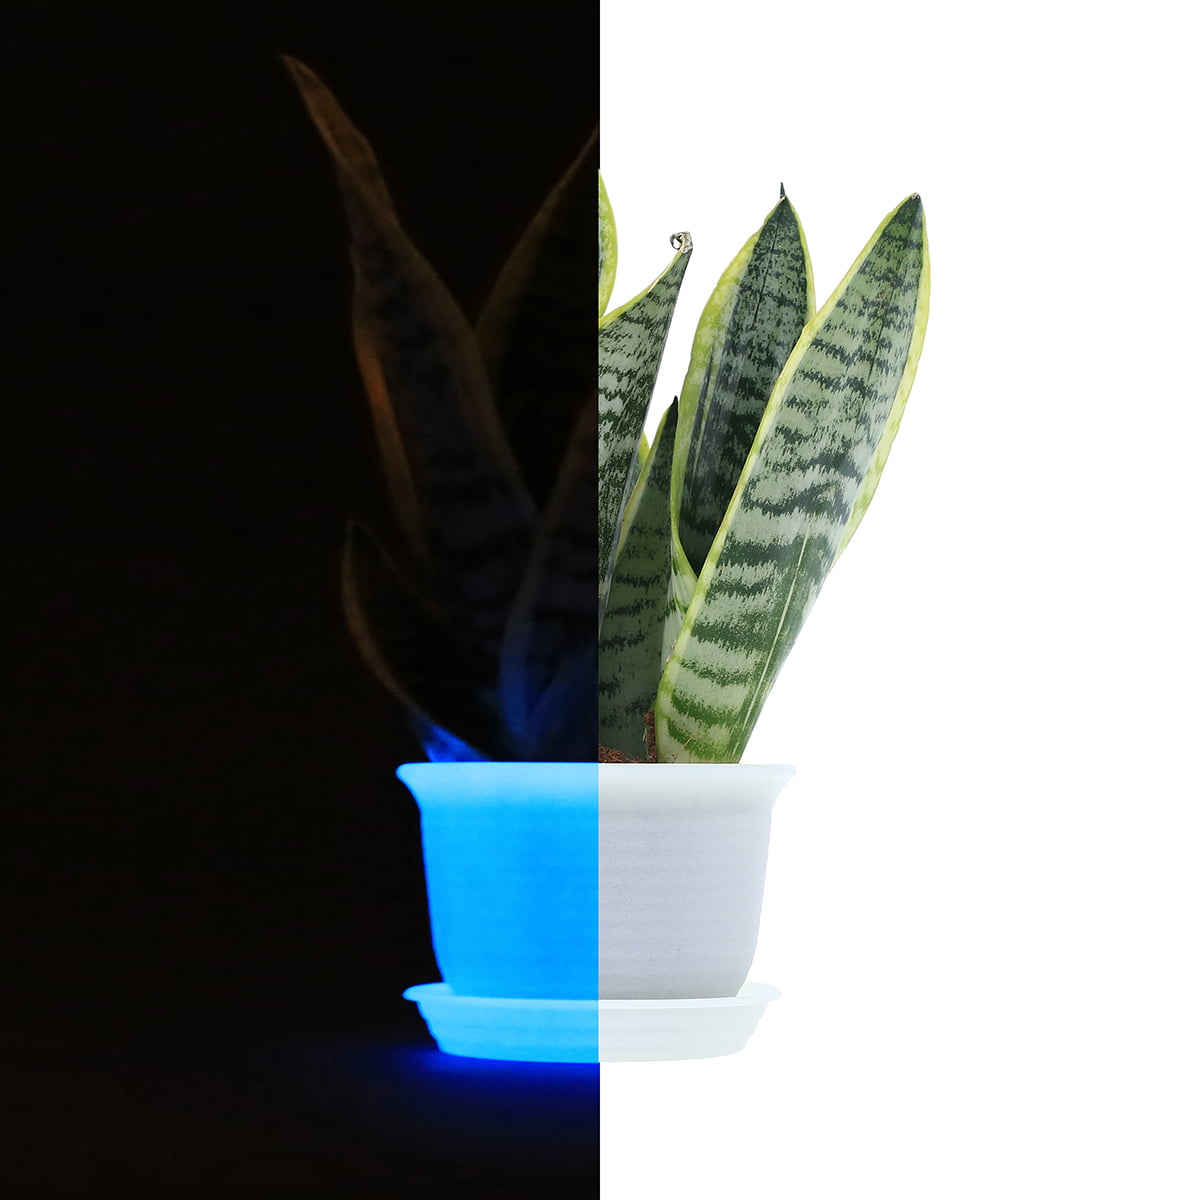 10 Set Glow in the Dark Flower Pots 6" with Drainage and Saucers for Modern Indoor Plants, Orchid, Herbs, Succulents, Cactus, and Seeding Nursery, Bulk, White Color (Glow Blue)